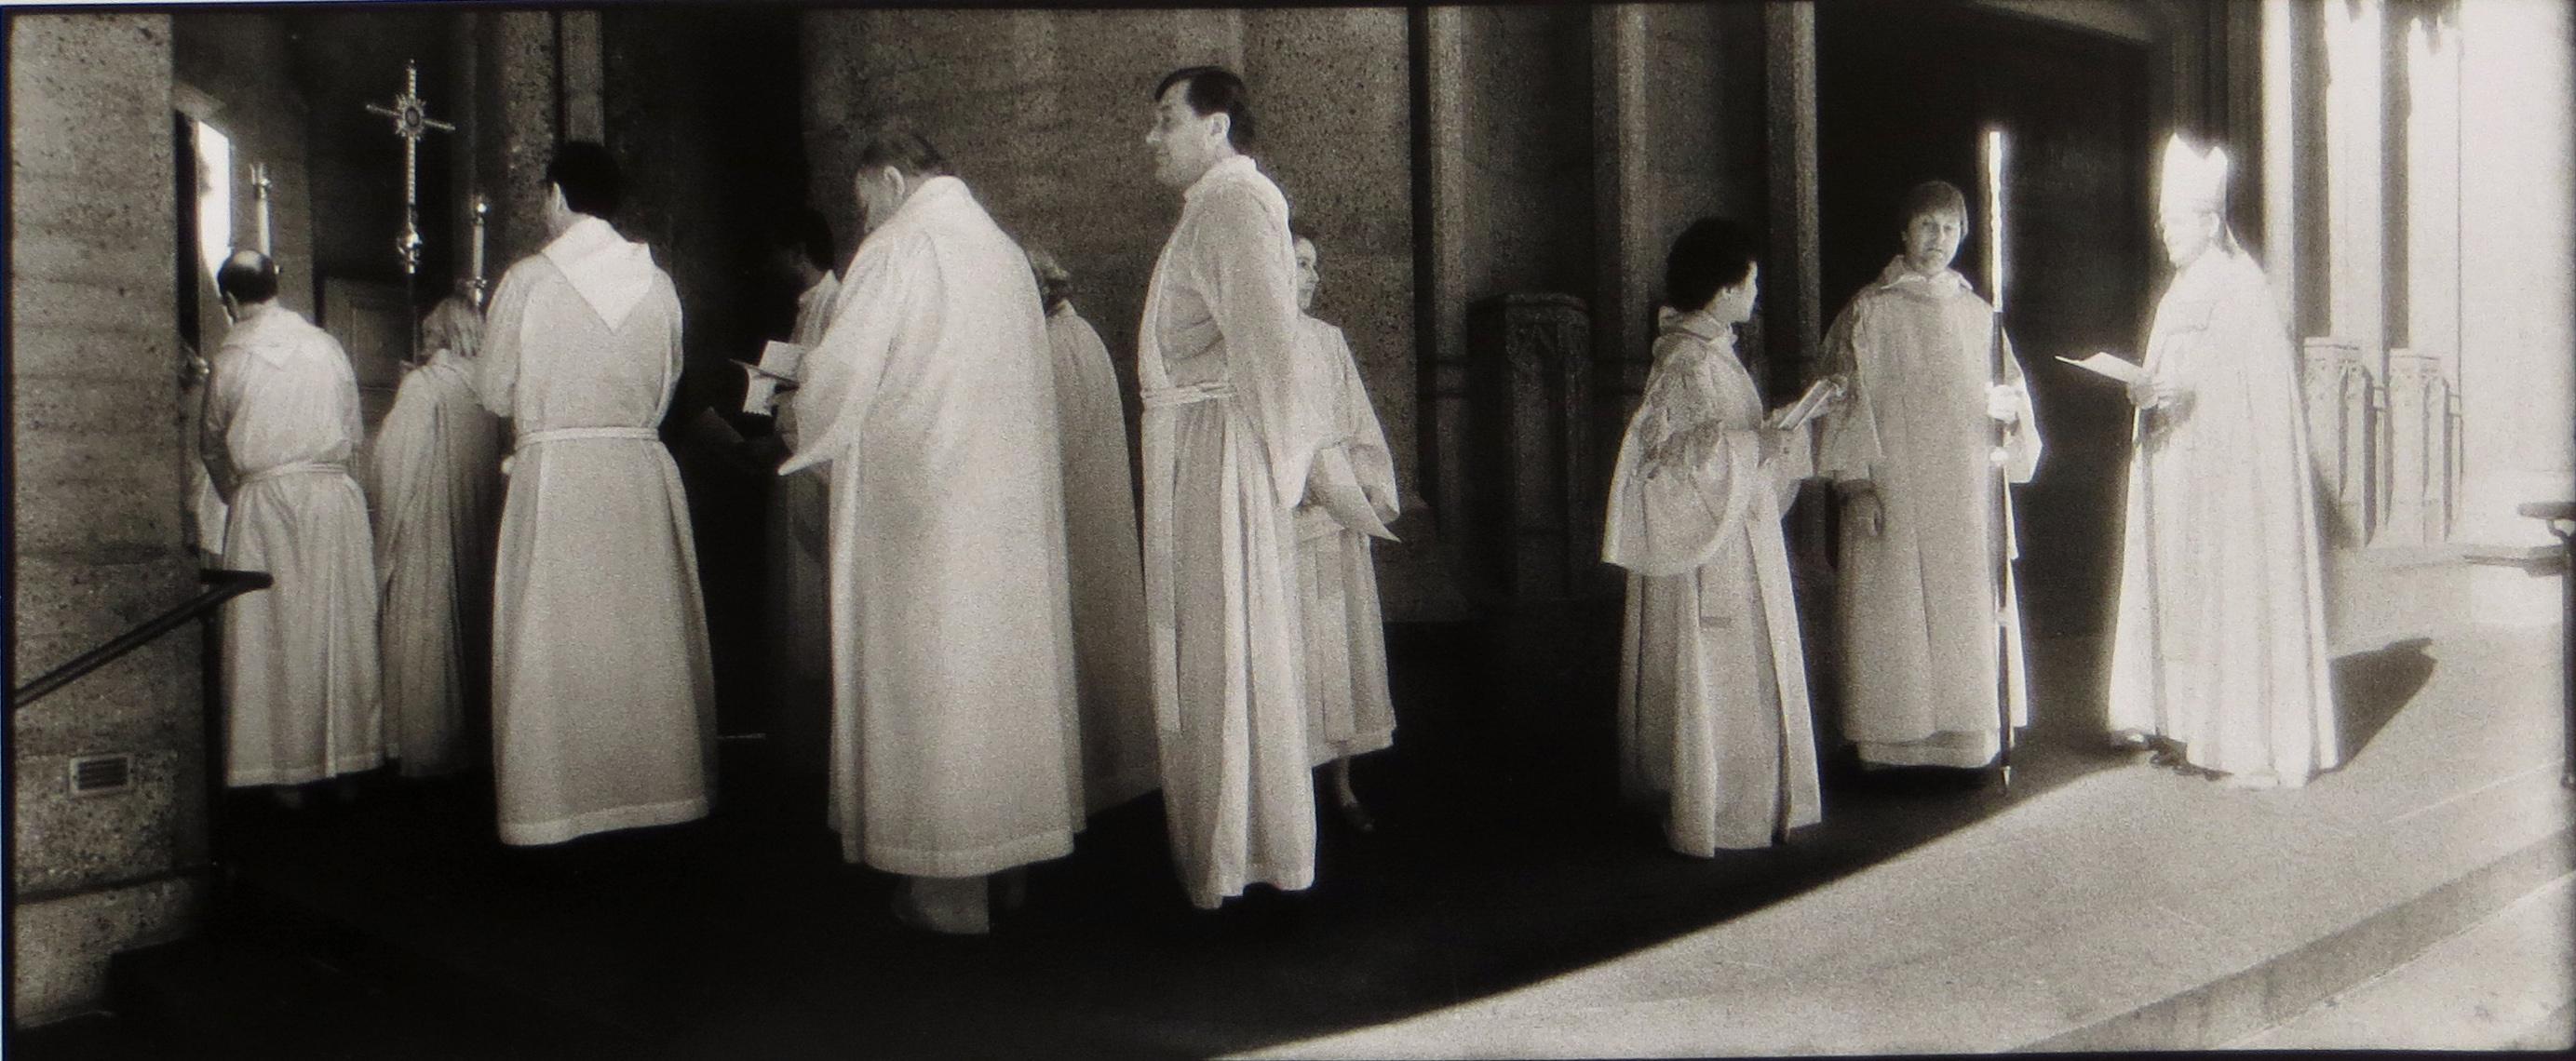 Geir Jordahl Black and White Photograph - Ecumenical Service, Grace Cathedral, San Francisco